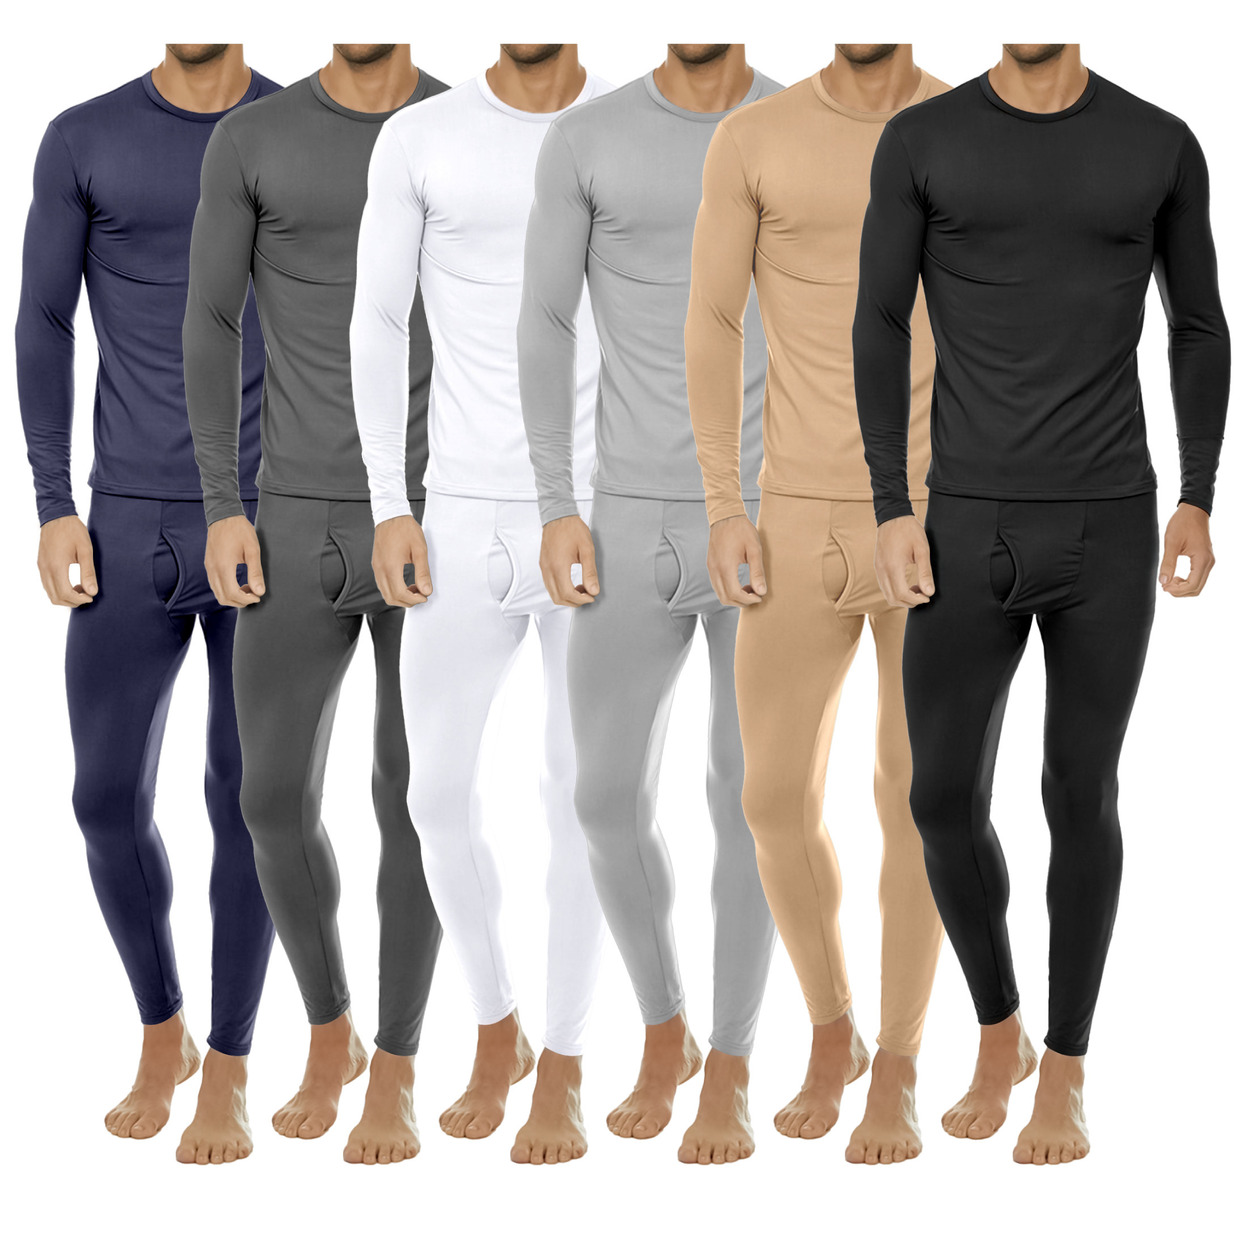 2-Pieces: Men's Winter Warm Fleece Lined Thermal Underwear Set For Cold Weather - Navy, Large